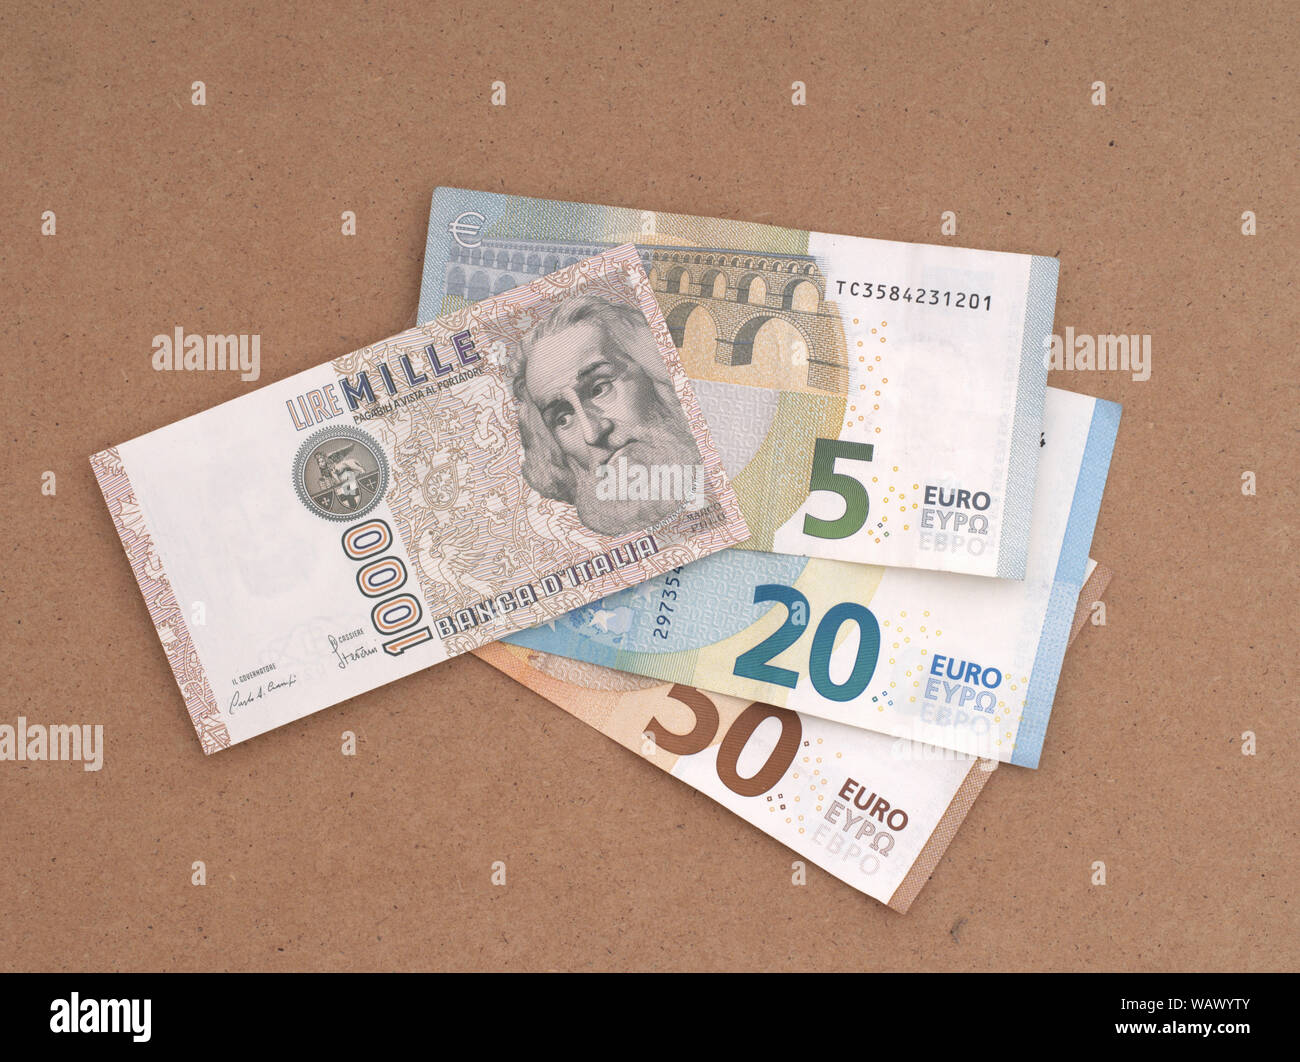 MASSA CARRARA, ITALY - AUGUST 14, 2019: Italian vintage and obsolete Lire note overlays and part obscures new Euro money. Stock Photo